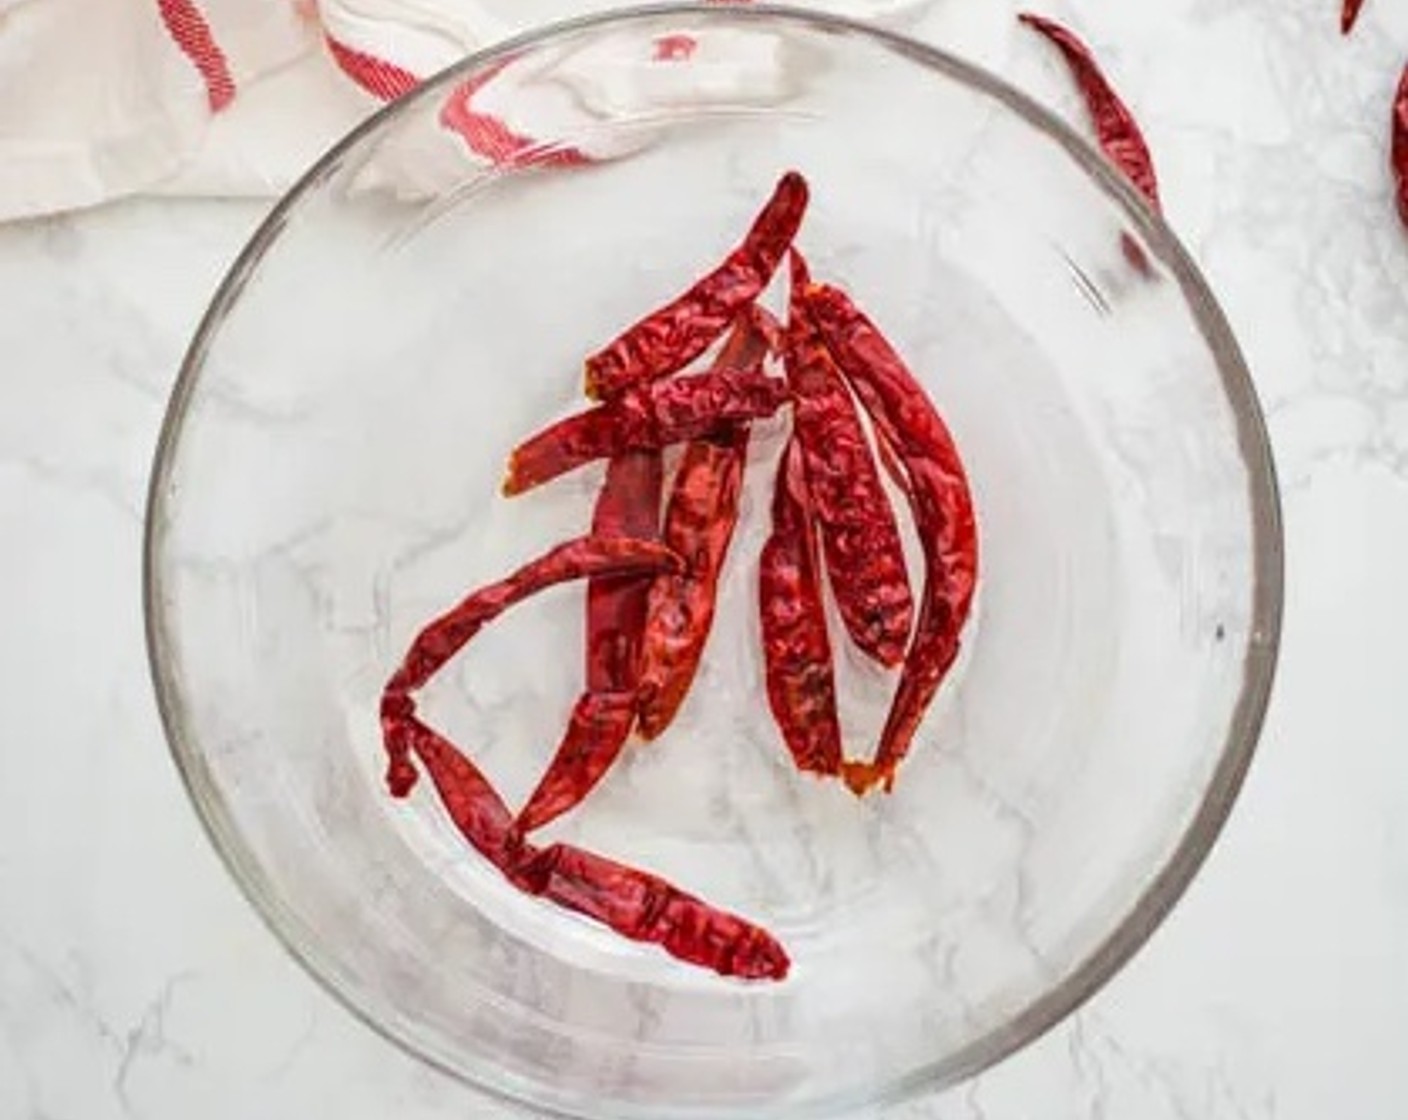 step 1 Rinse then soak the Dried Red Chili Peppers (10) in a bowl of warm water, and the Tamarind Paste (1 Tbsp) in a separate small bowl in 1/4 cup of warm water. Allow the dried red chilies and the tamarind to soak for 15 minutes.